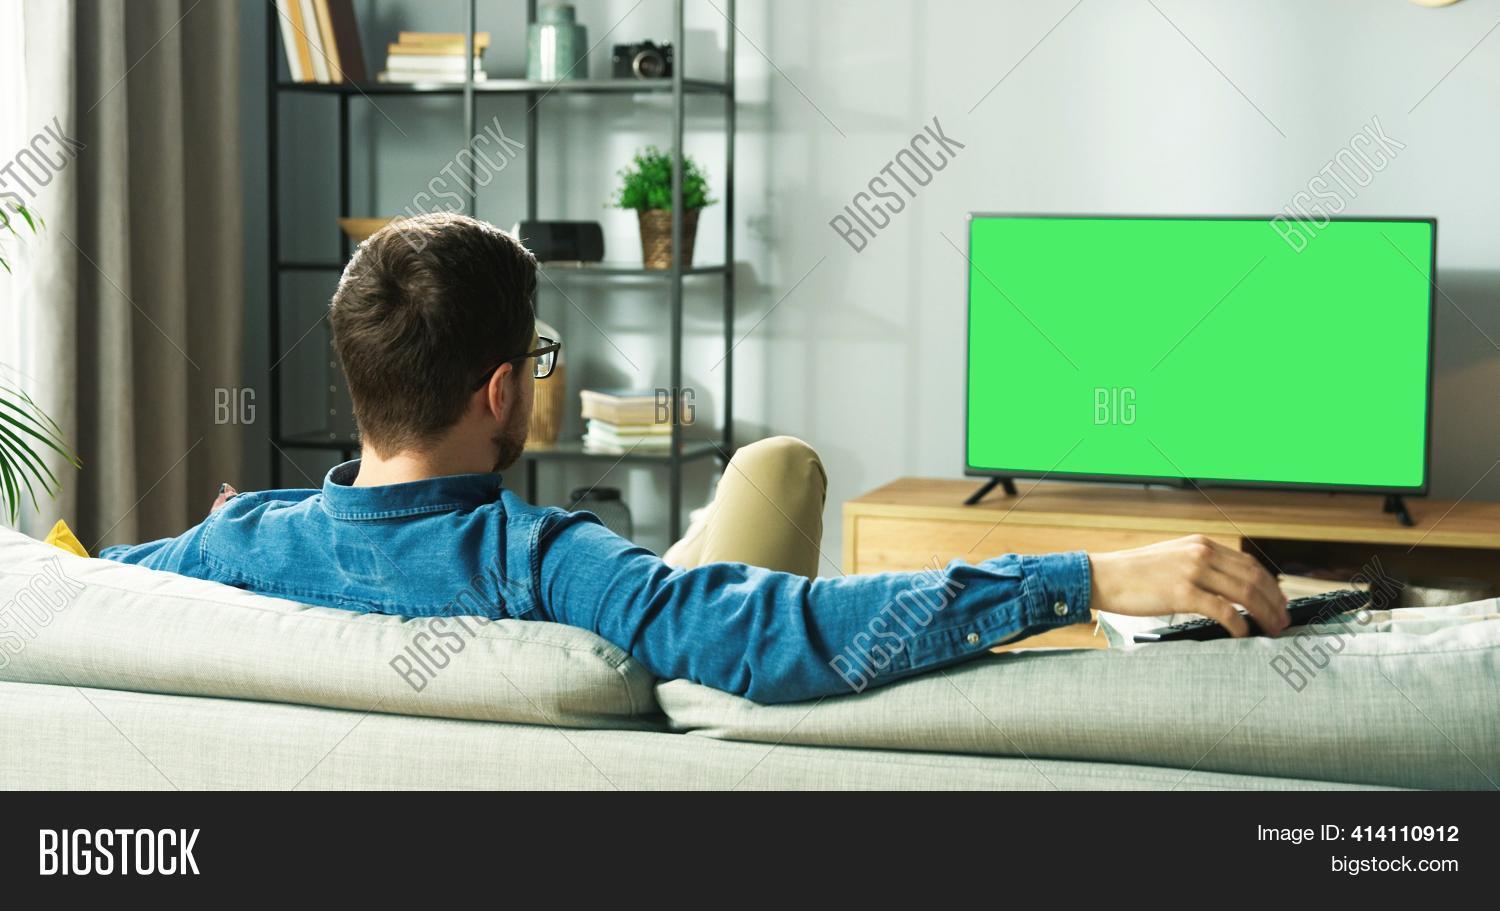 Guy Sitting On Couch hbo stream